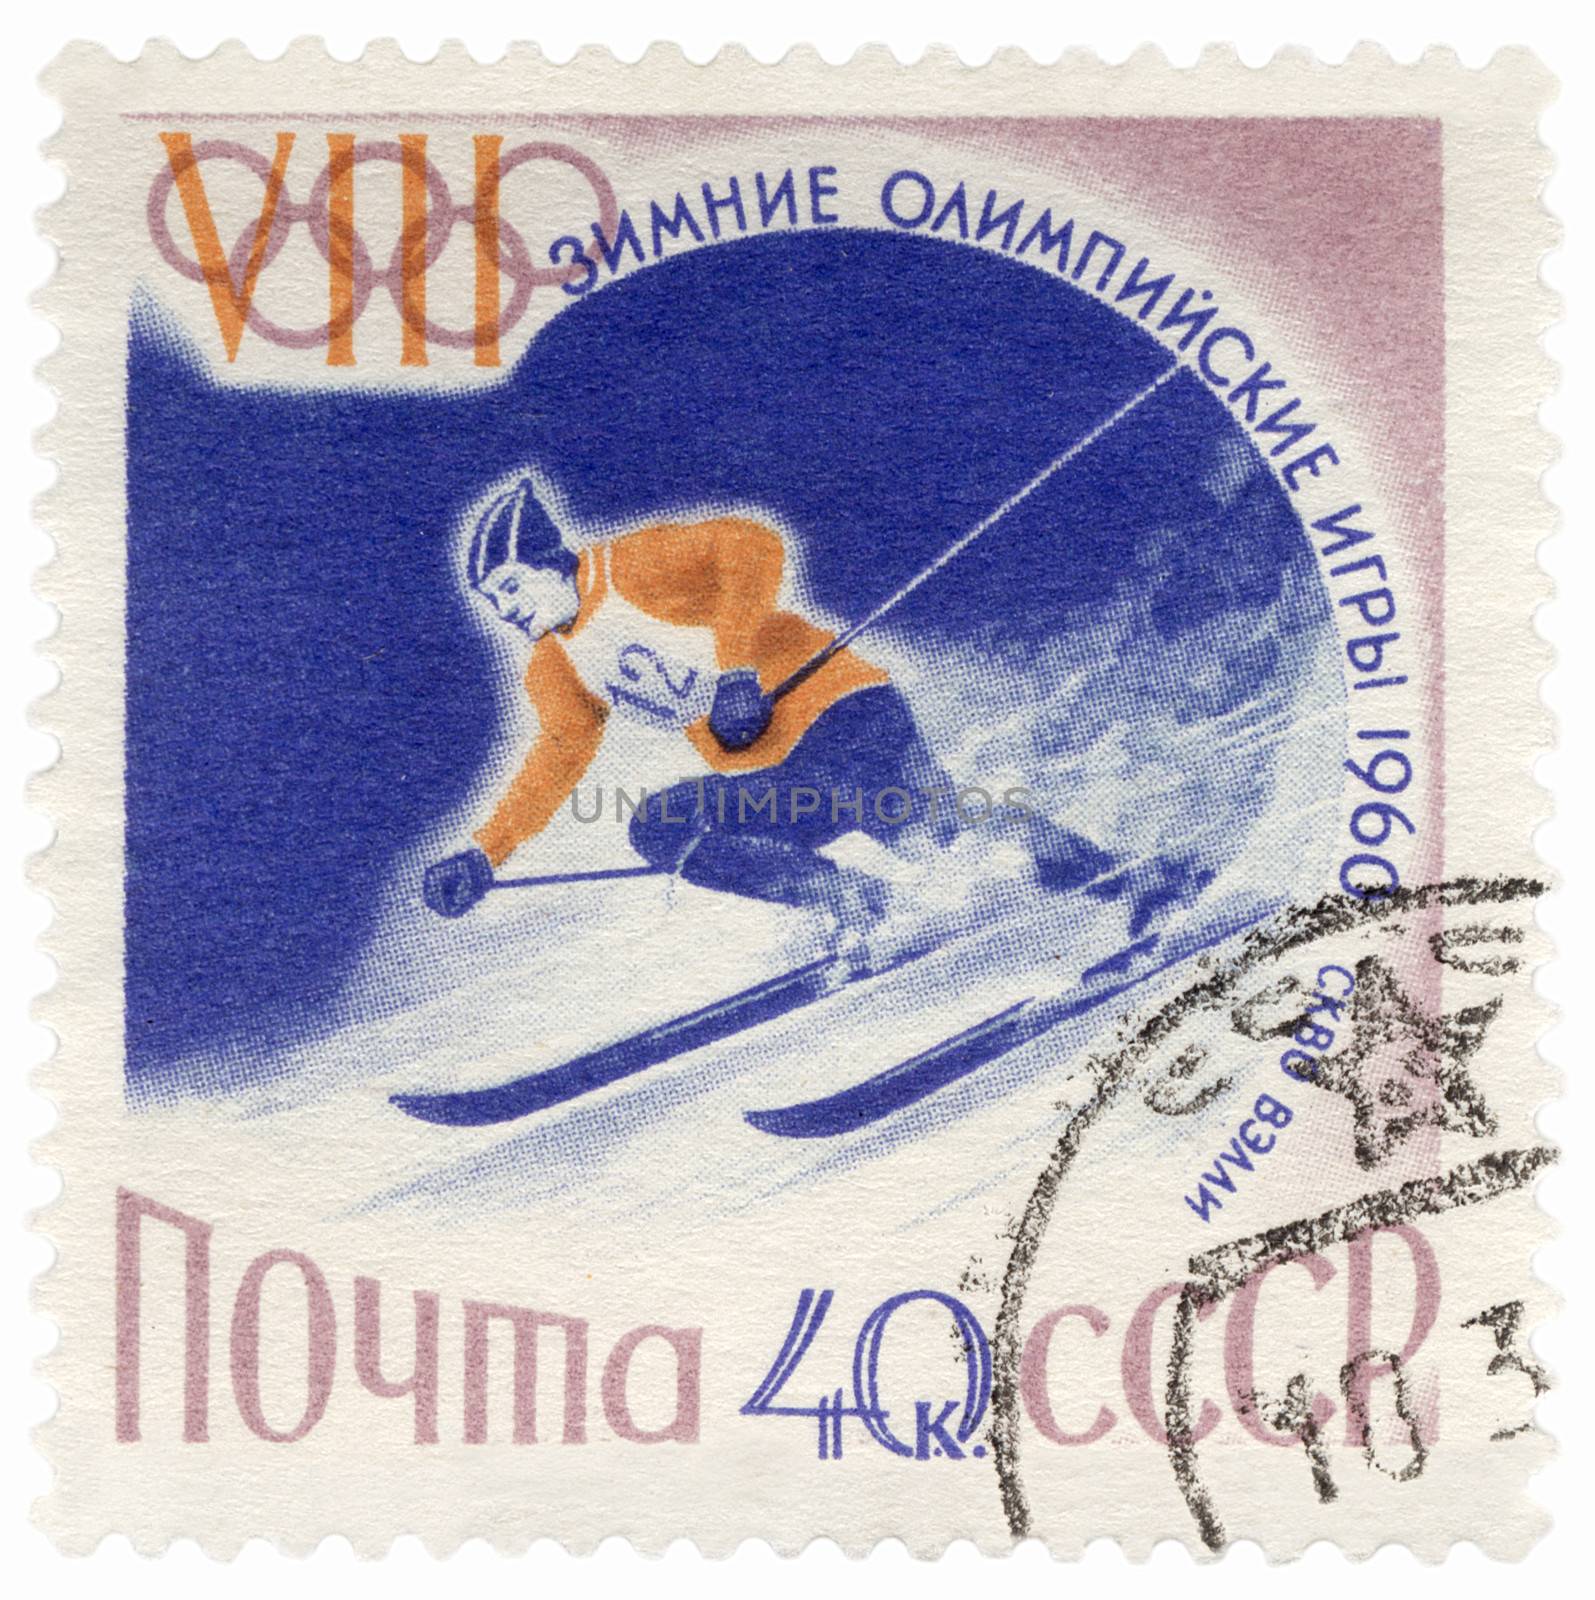 Skier on a steep mountain slope on post stamp by wander